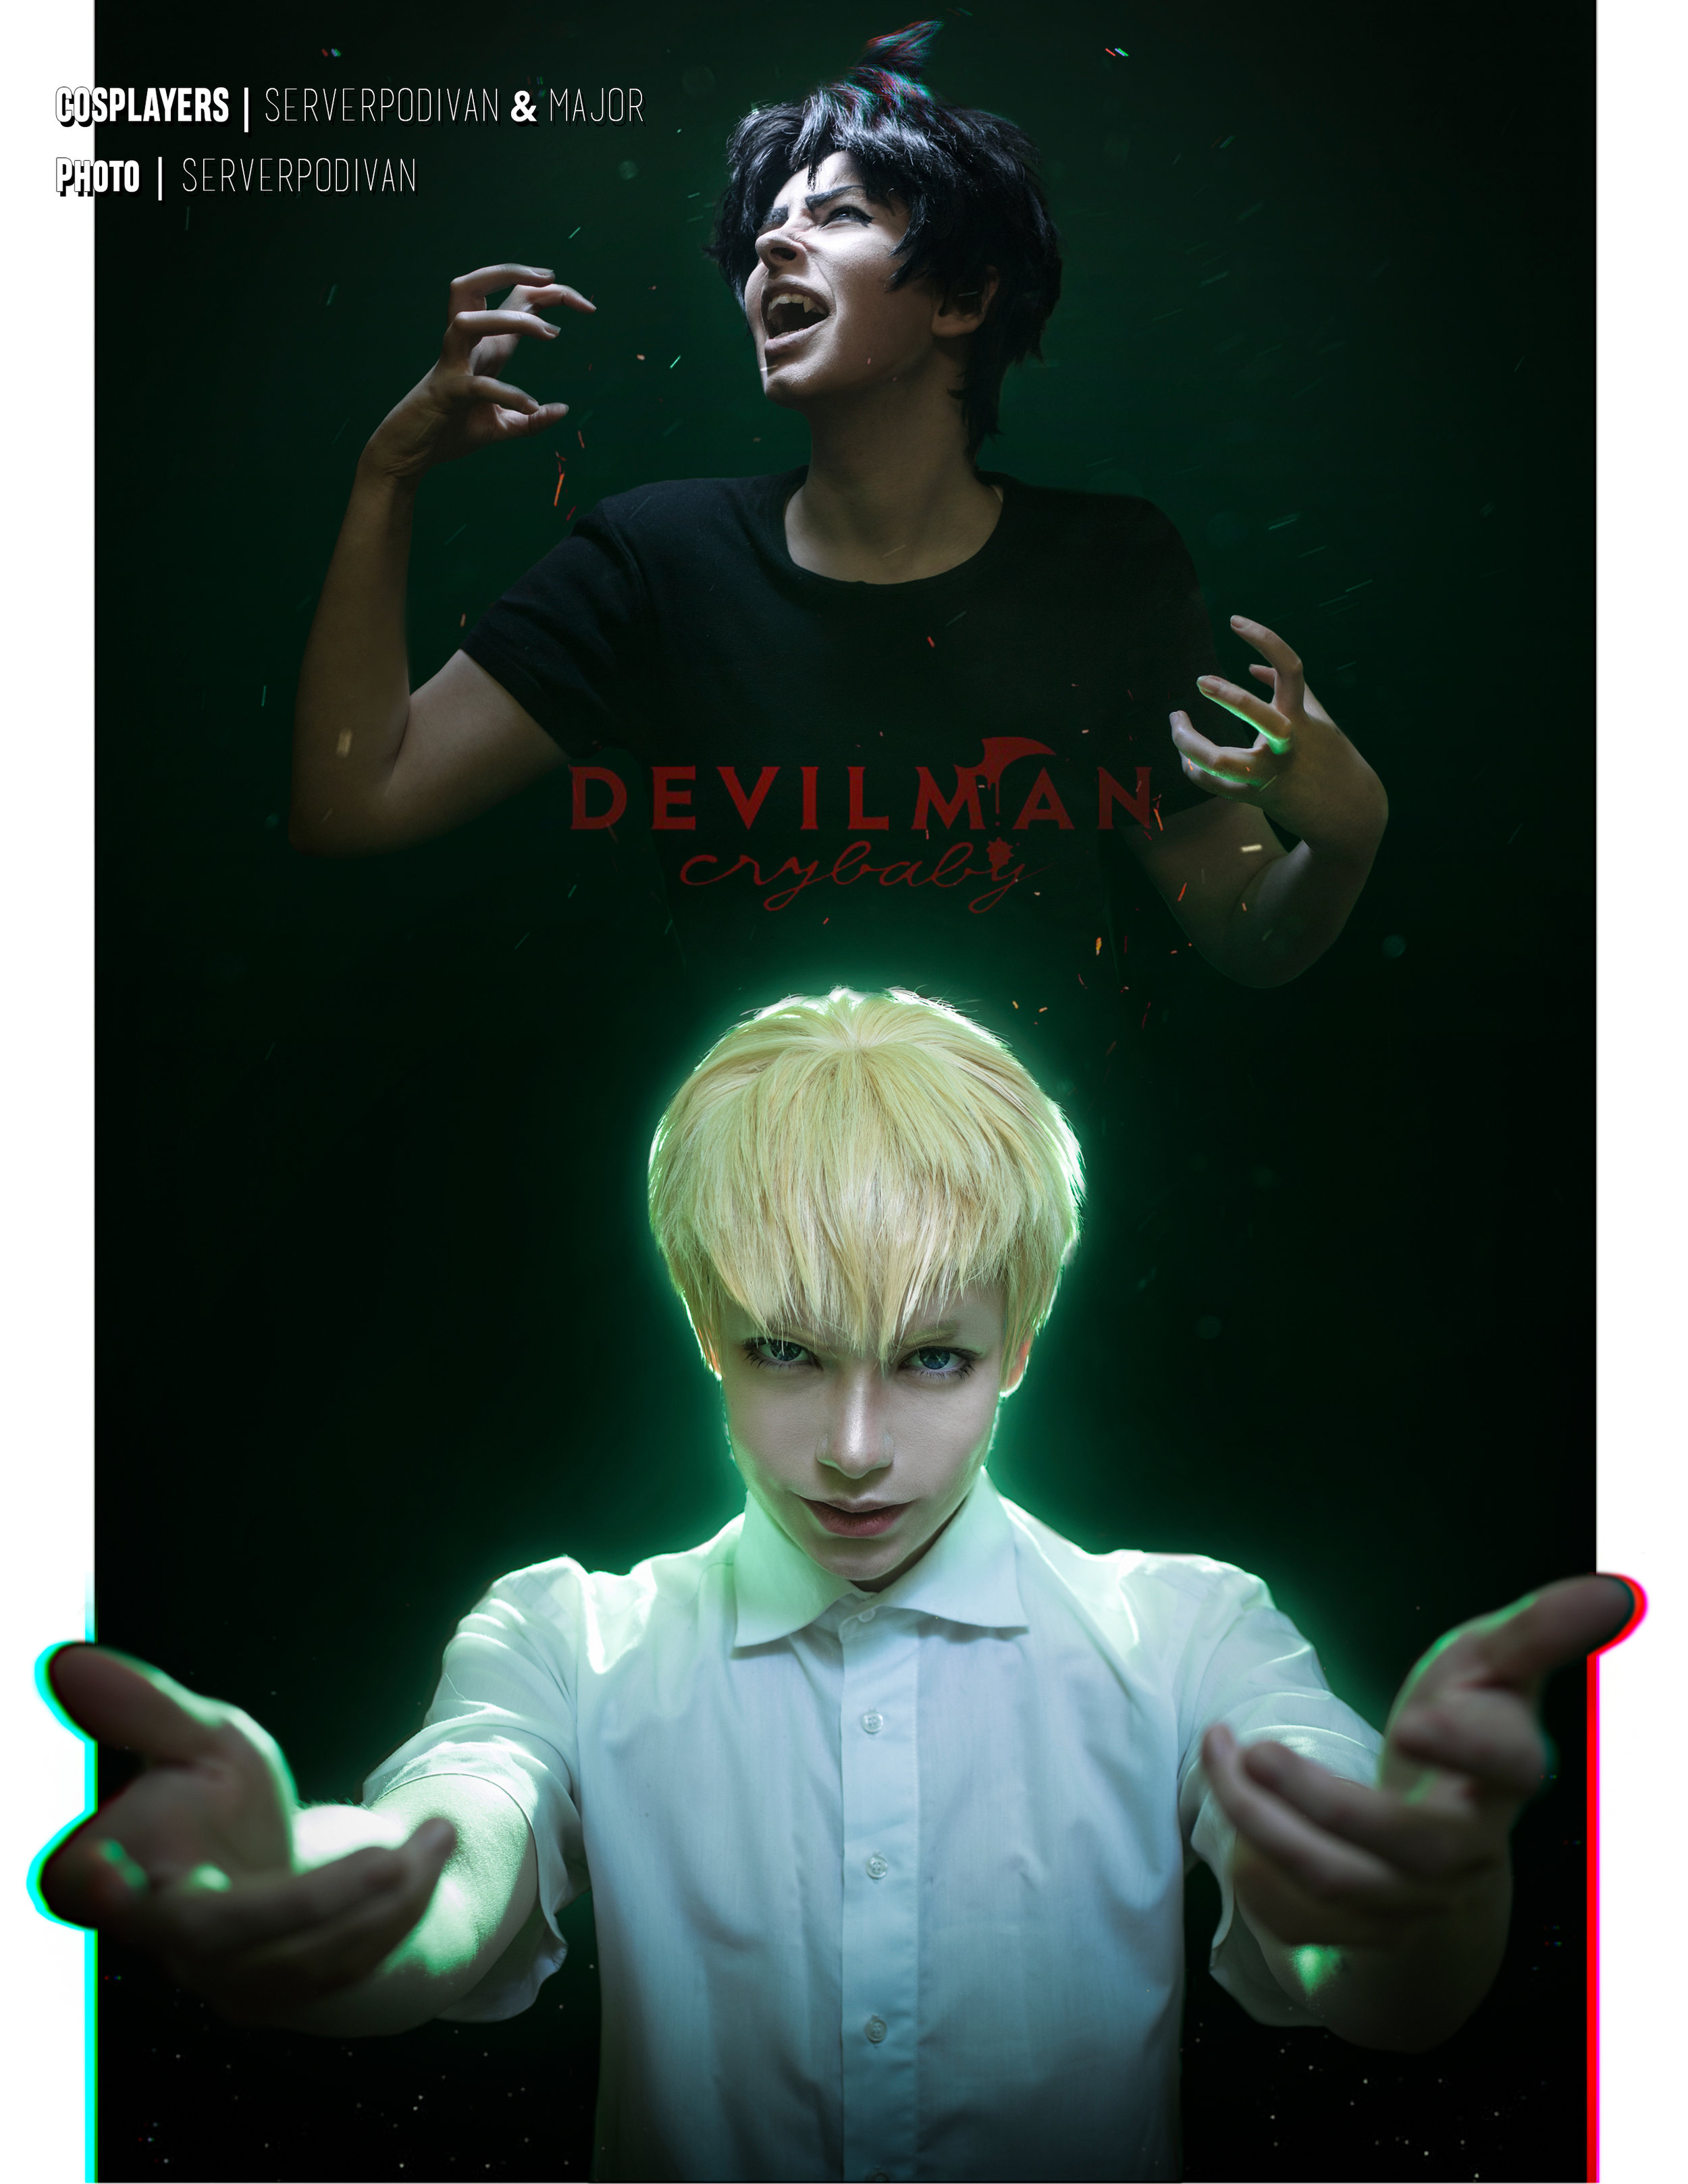 Devilman crybaby one year later â cosplay realm magazine